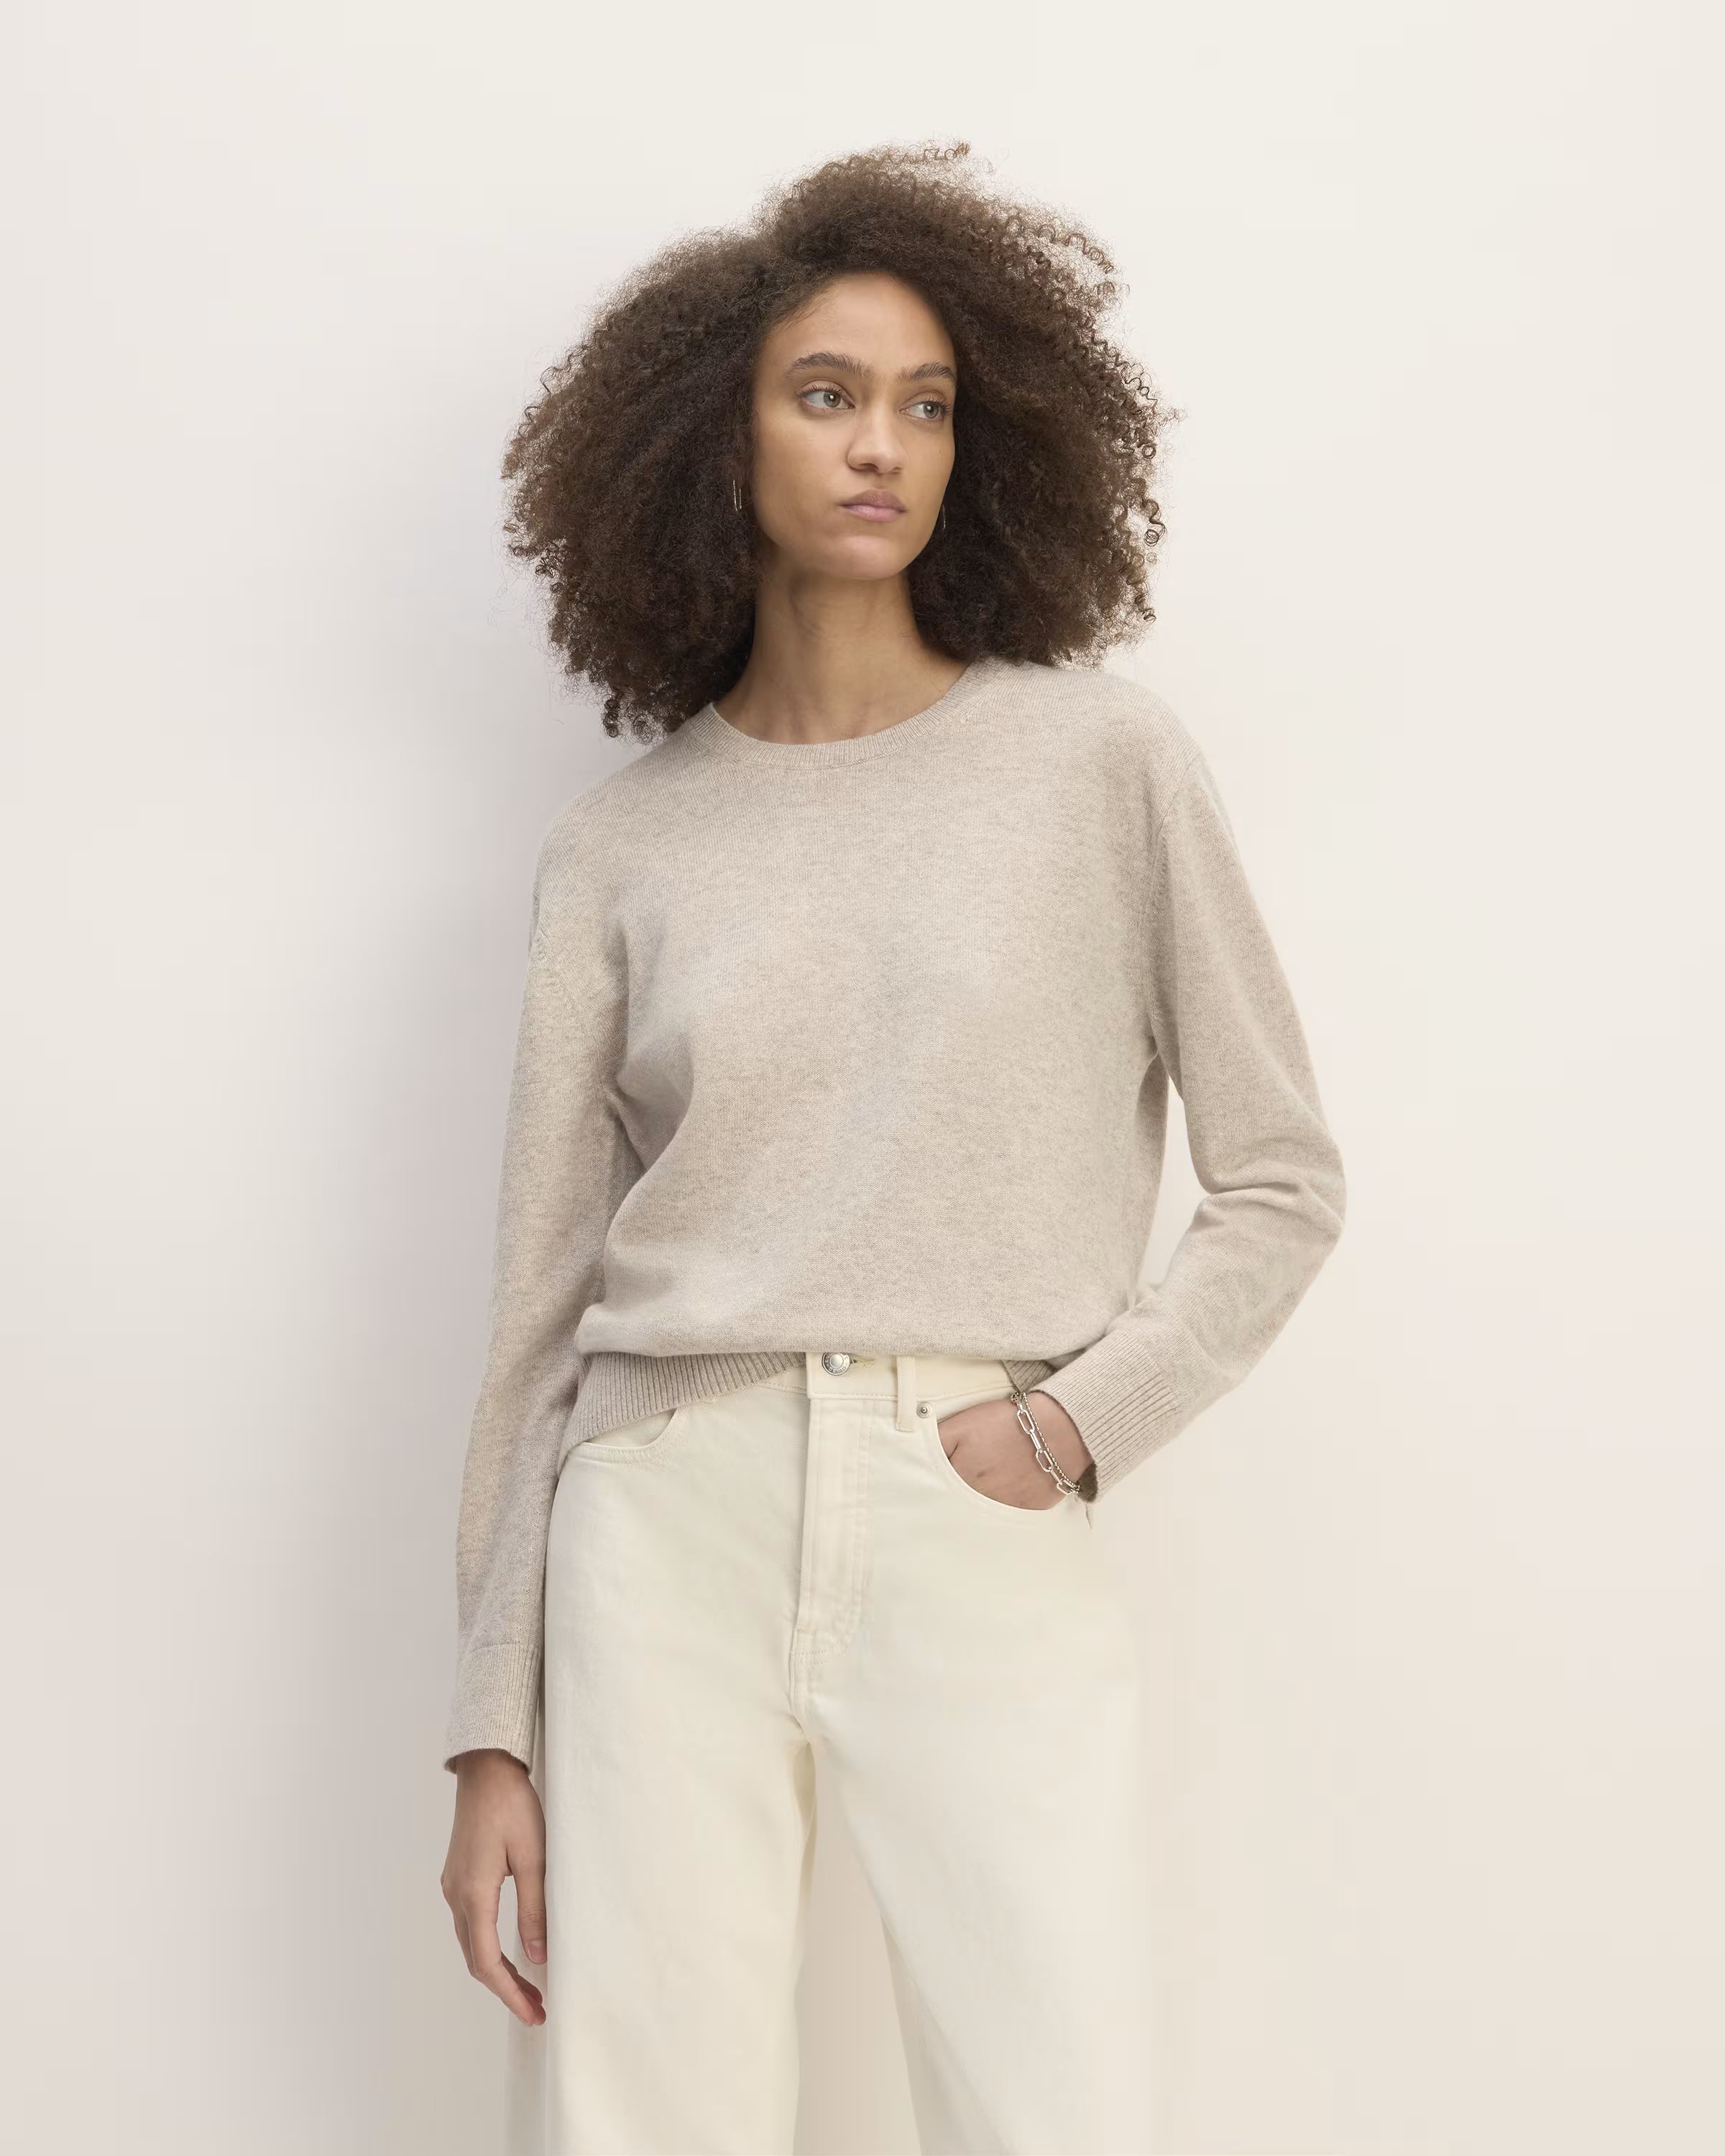 The Cashmere Classic Crew Sweater€1884.4 (34 Reviews)4.4 out of 5 stars. 34 reviews Price inclu... | Everlane